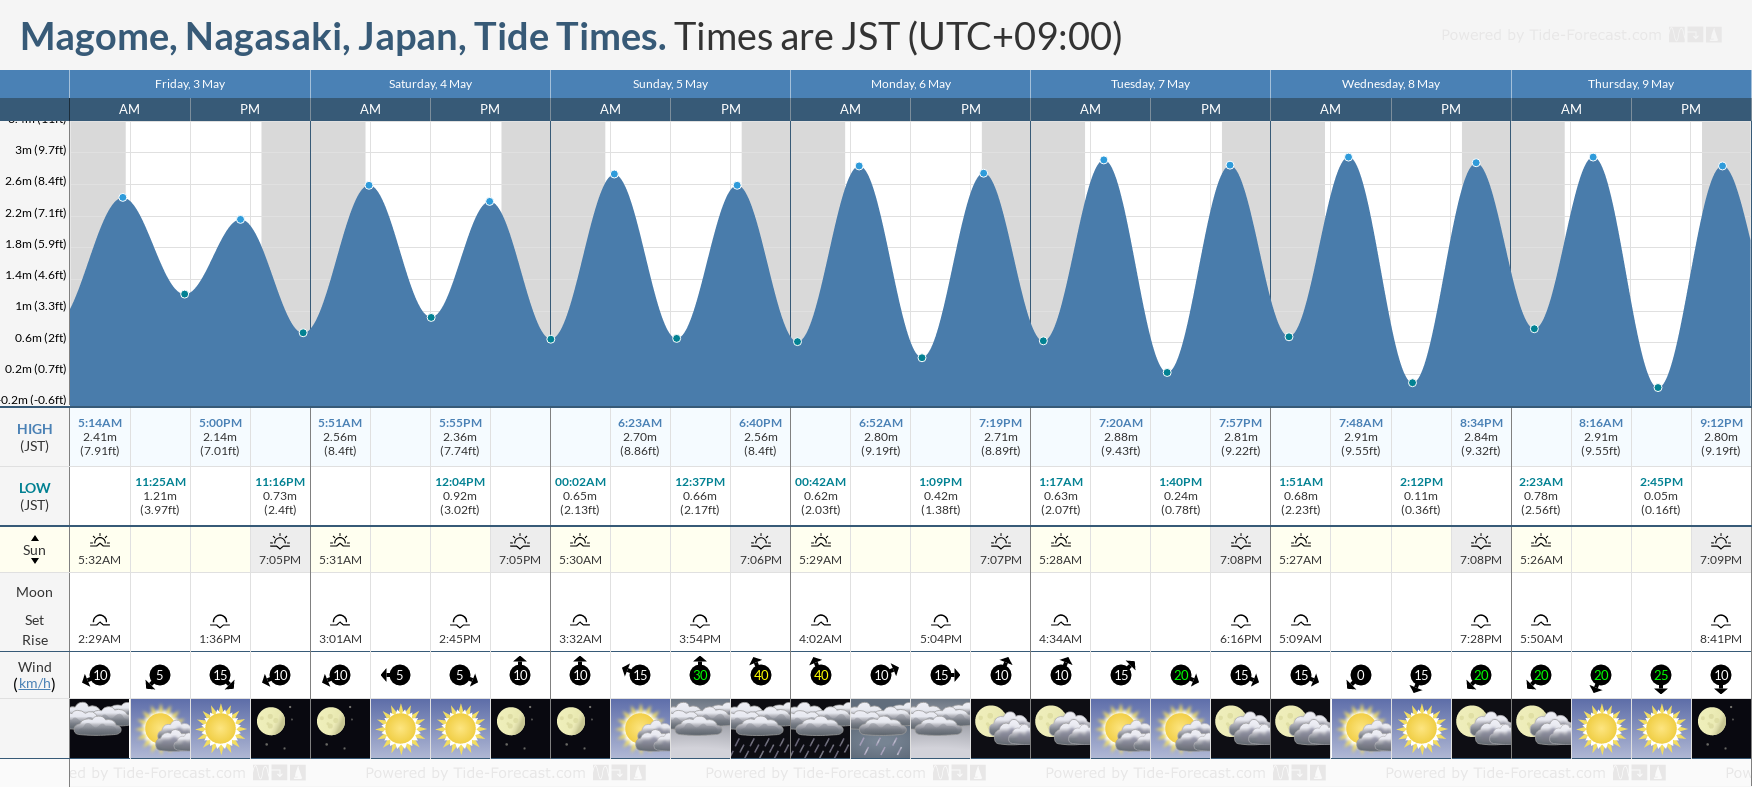 Magome, Nagasaki, Japan Tide Chart including high and low tide times for the next 7 days